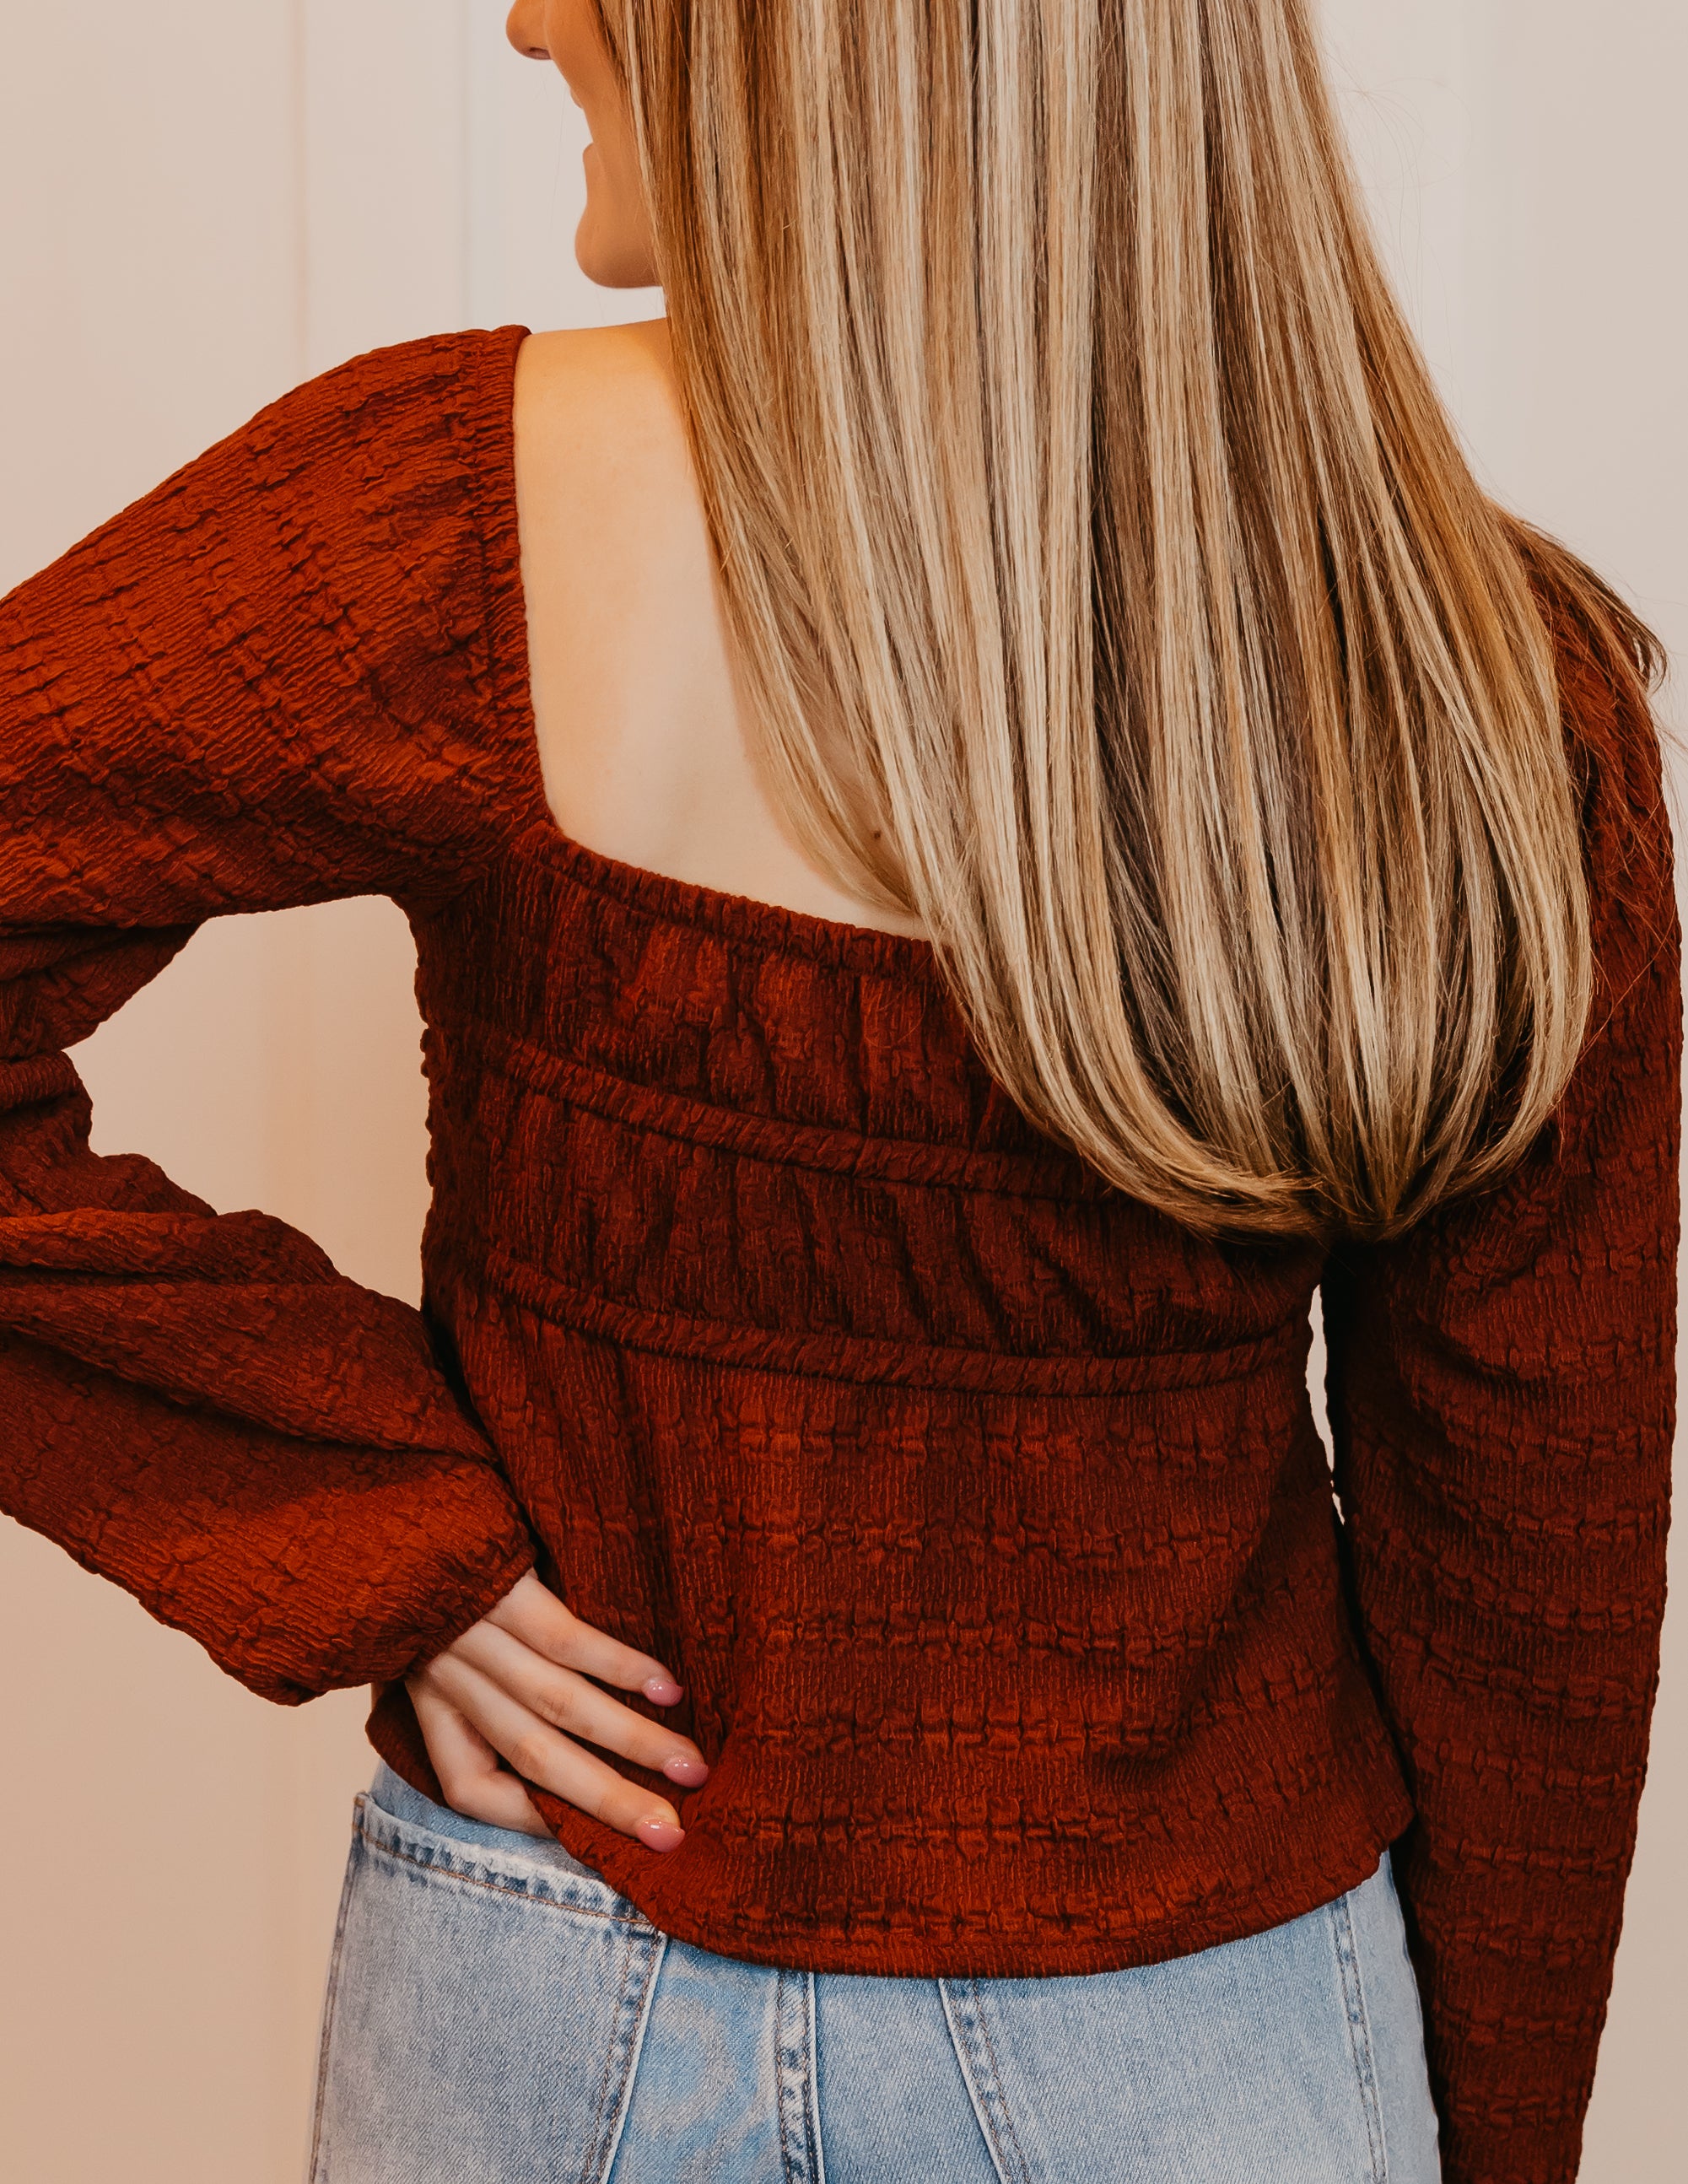 The Bree Top